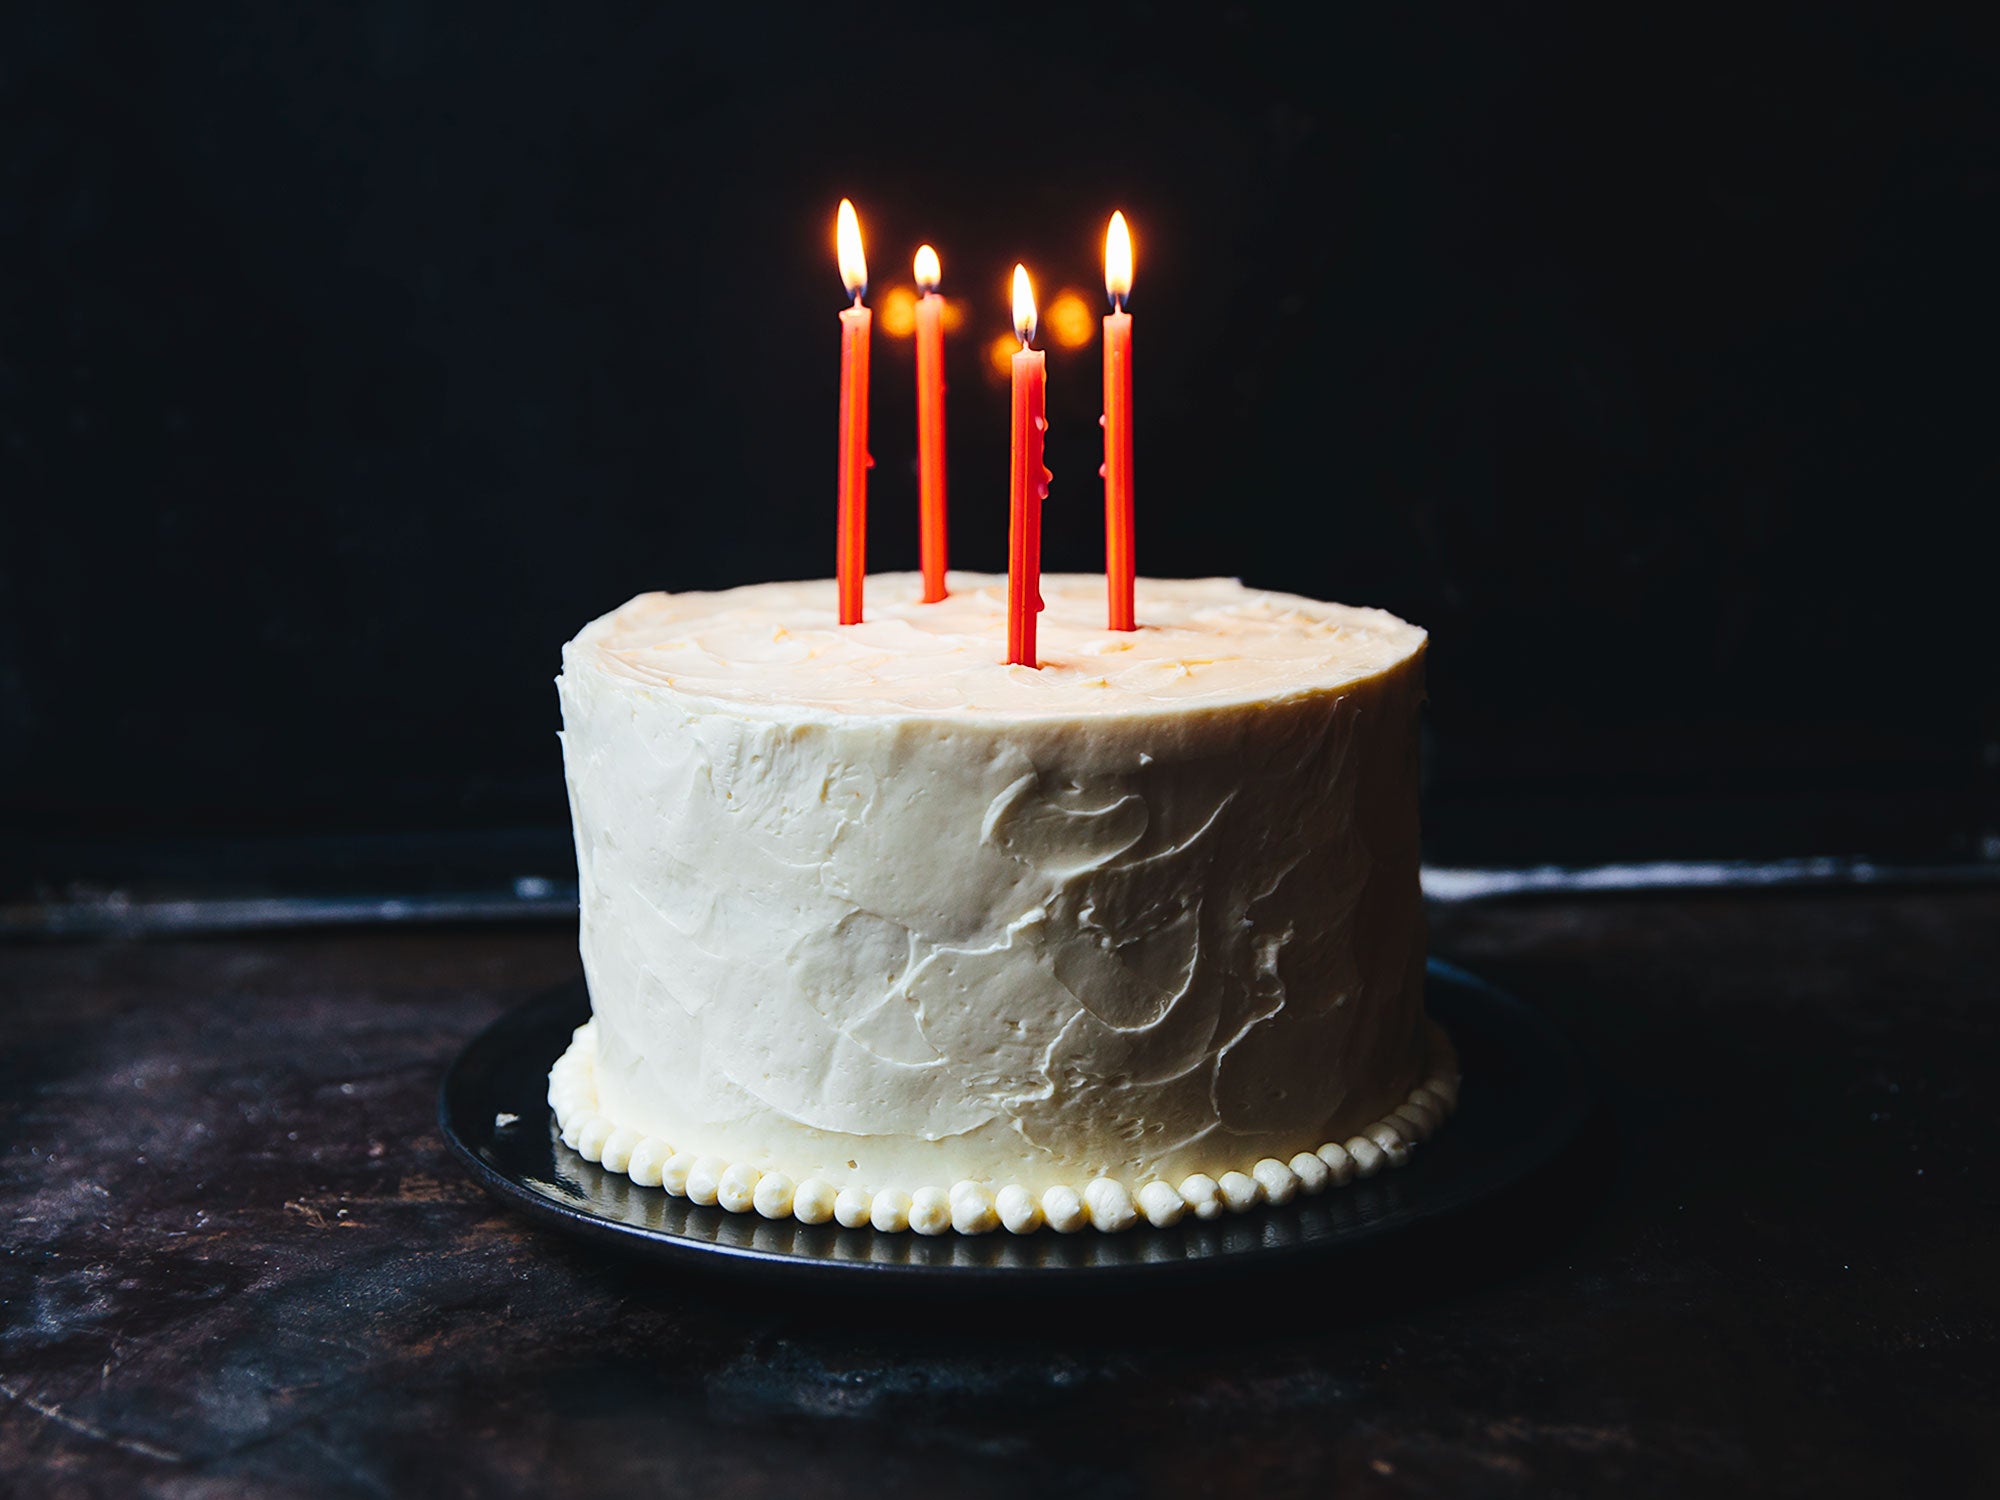 images of cakes with candles